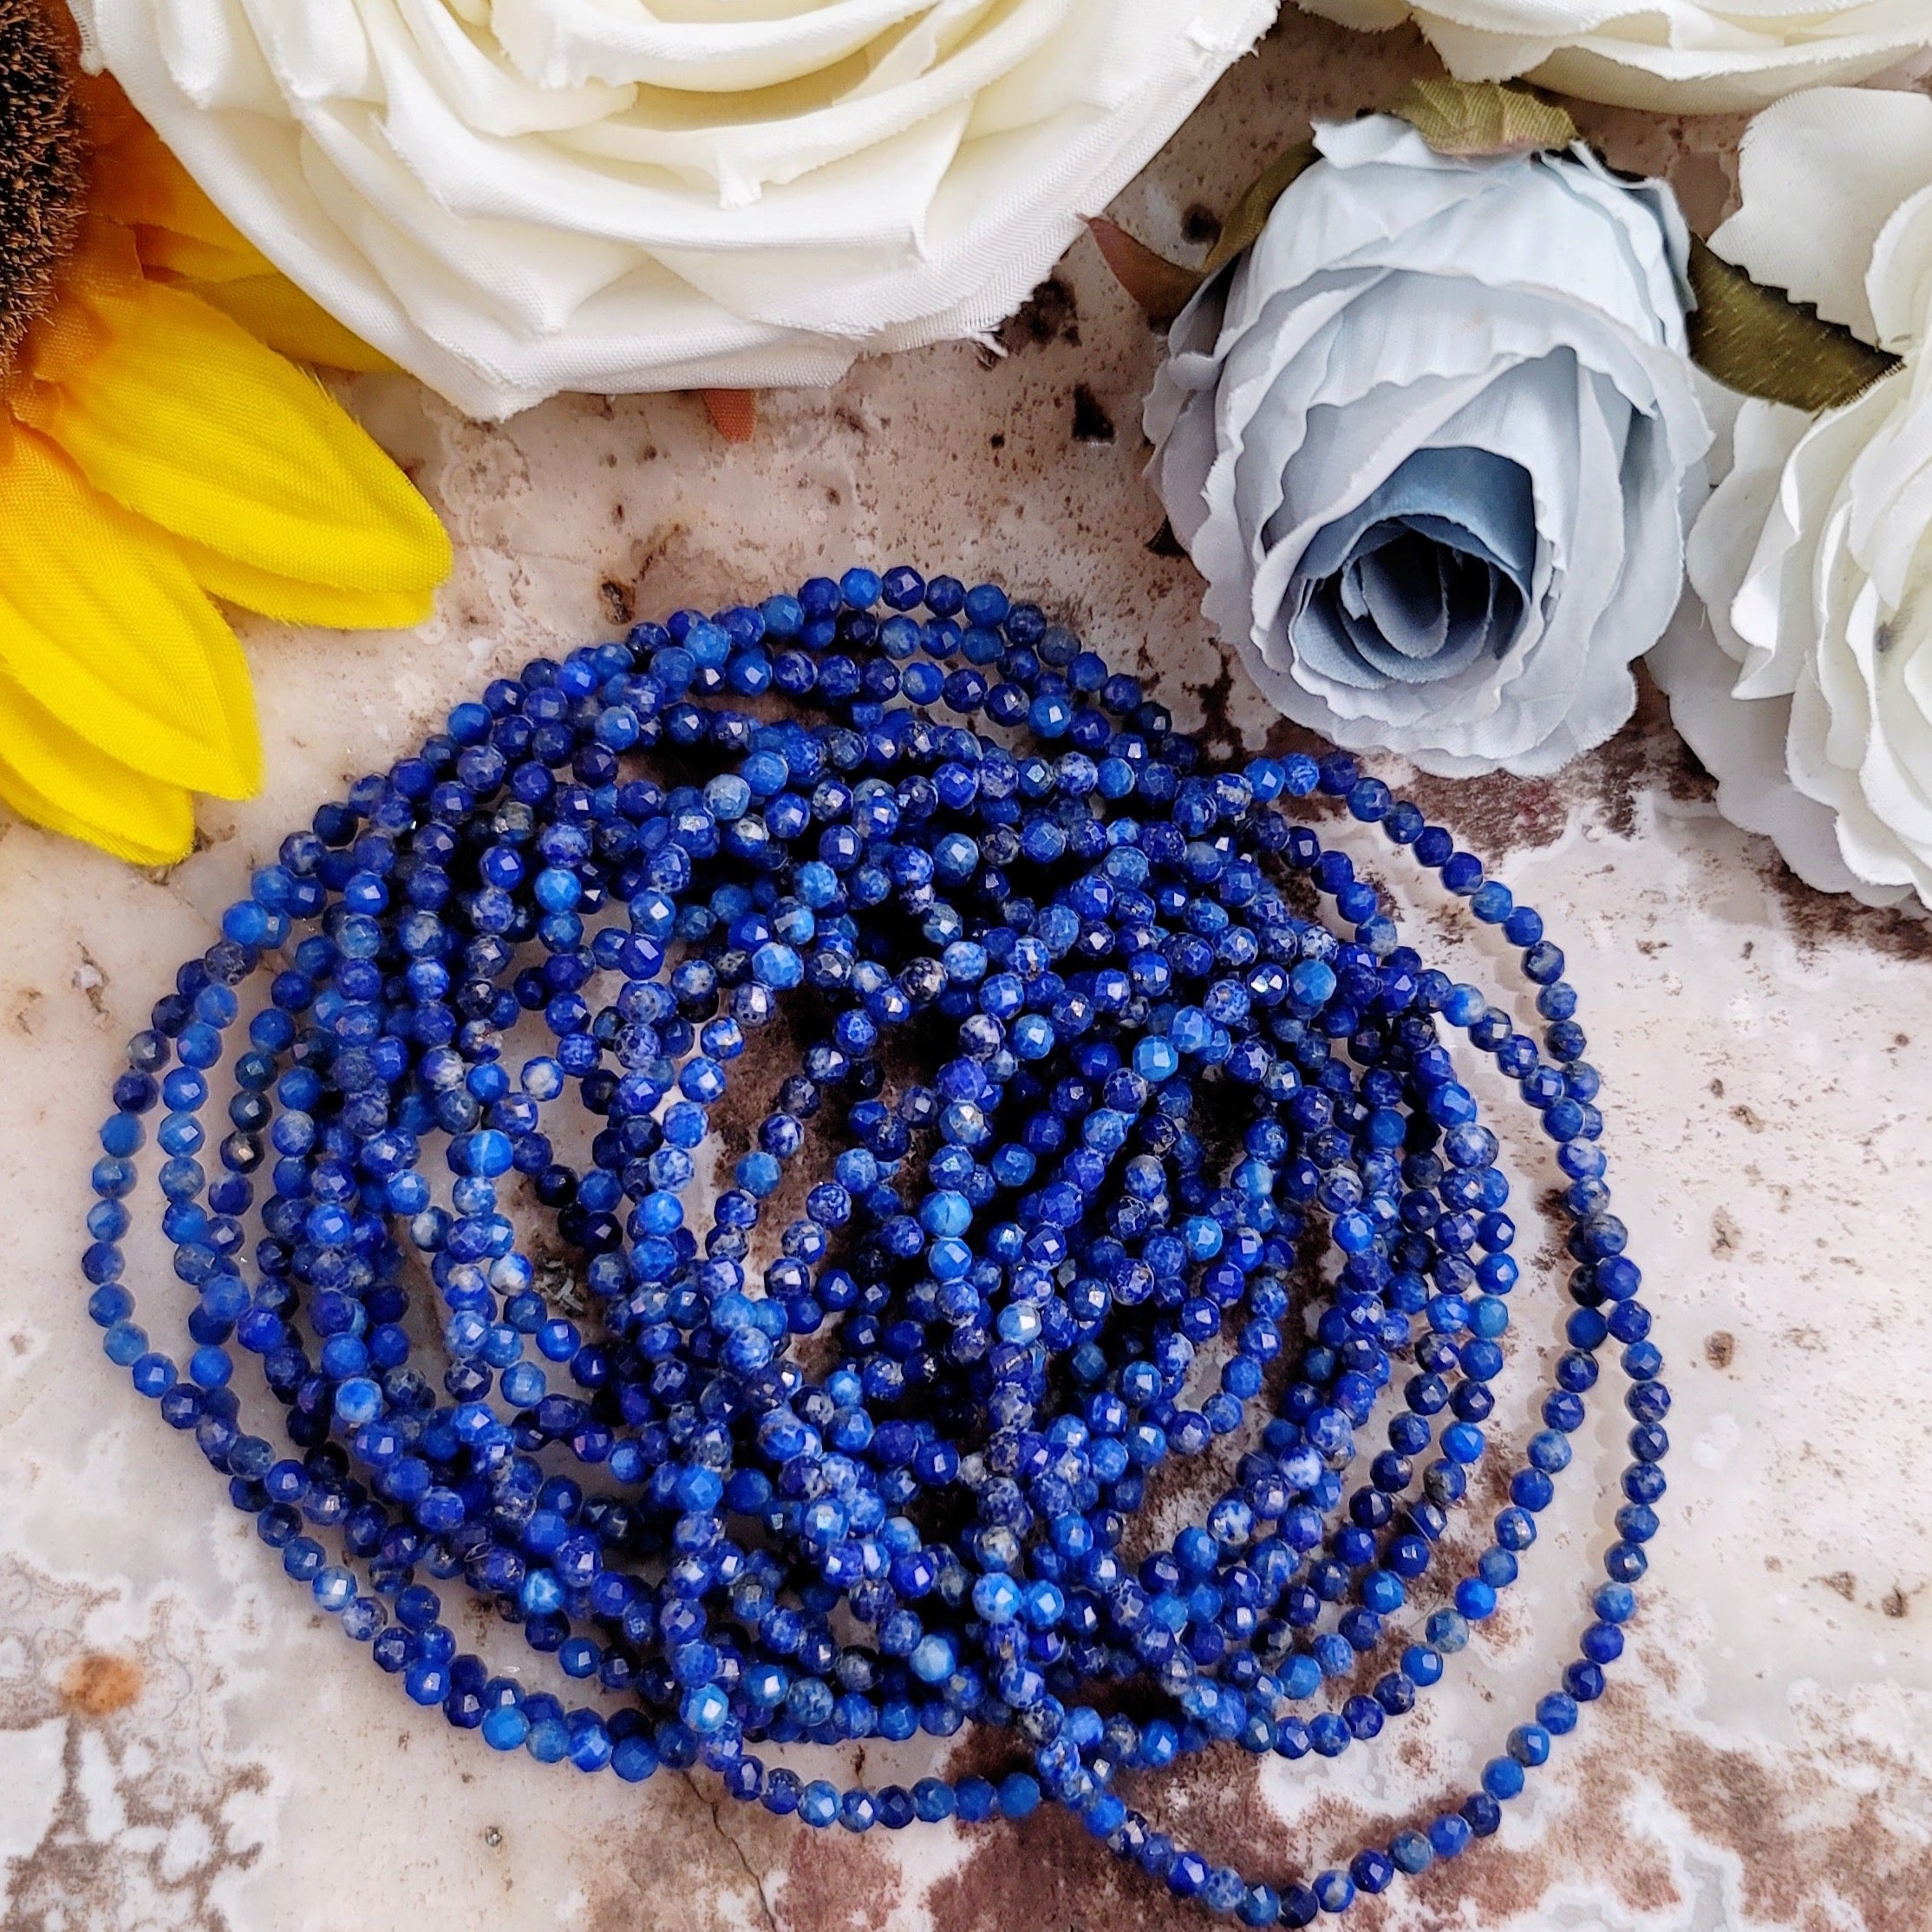 Lapis Lazuli Faceted Bracelet for Confidence, Intuition and Power